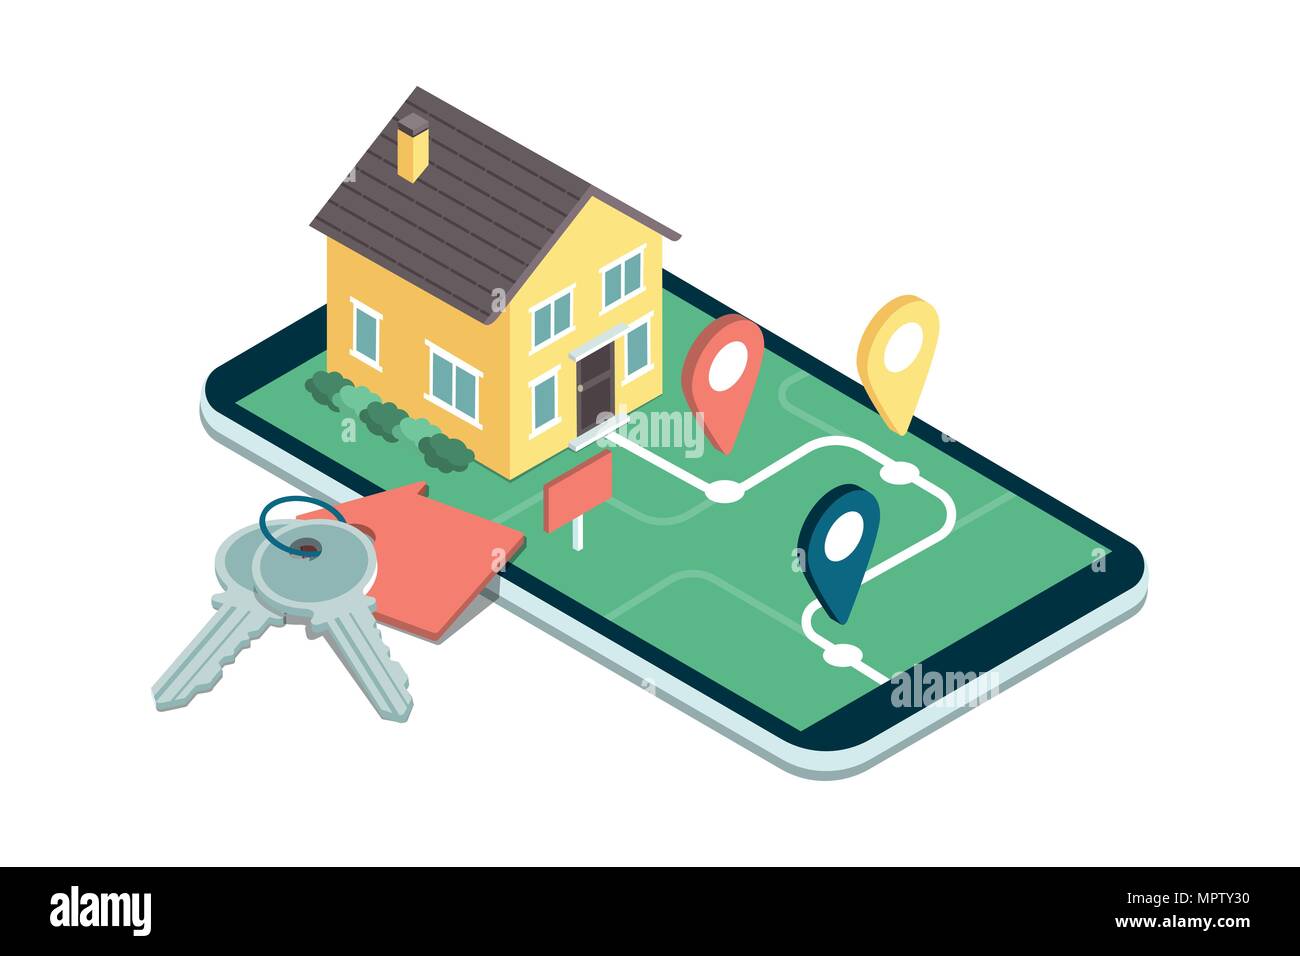 Find your dream home: model house on a map, house keys and icons, real estate mobile app Stock Vector